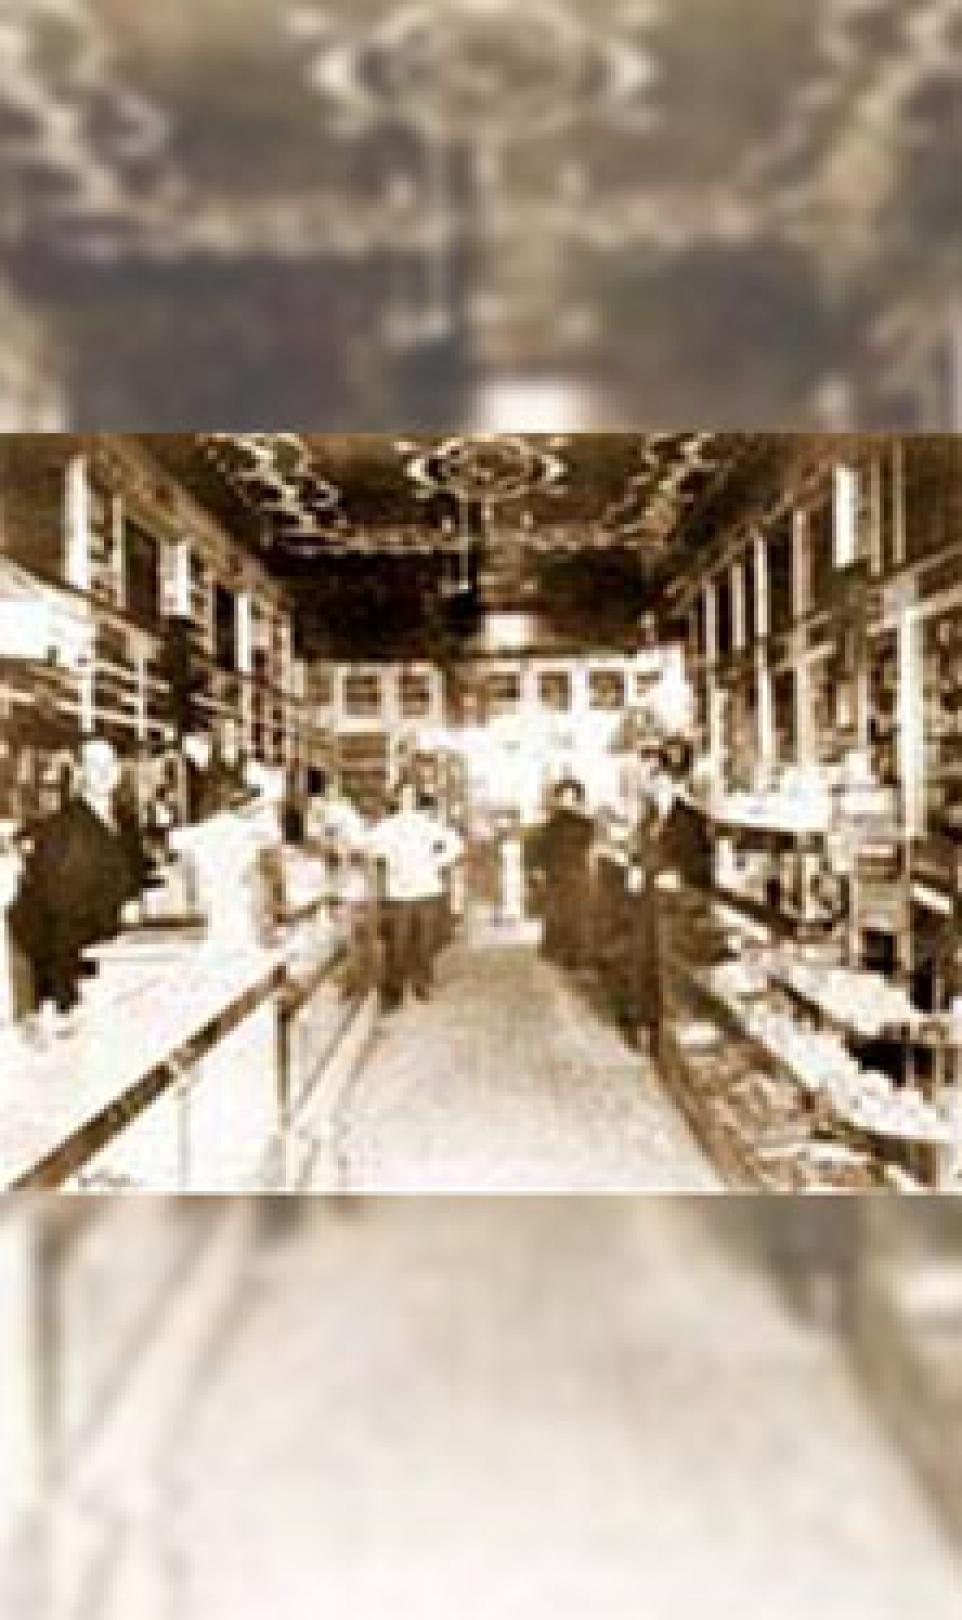 Photo of the inside of the second drugstore belonging to Walgreen Co.